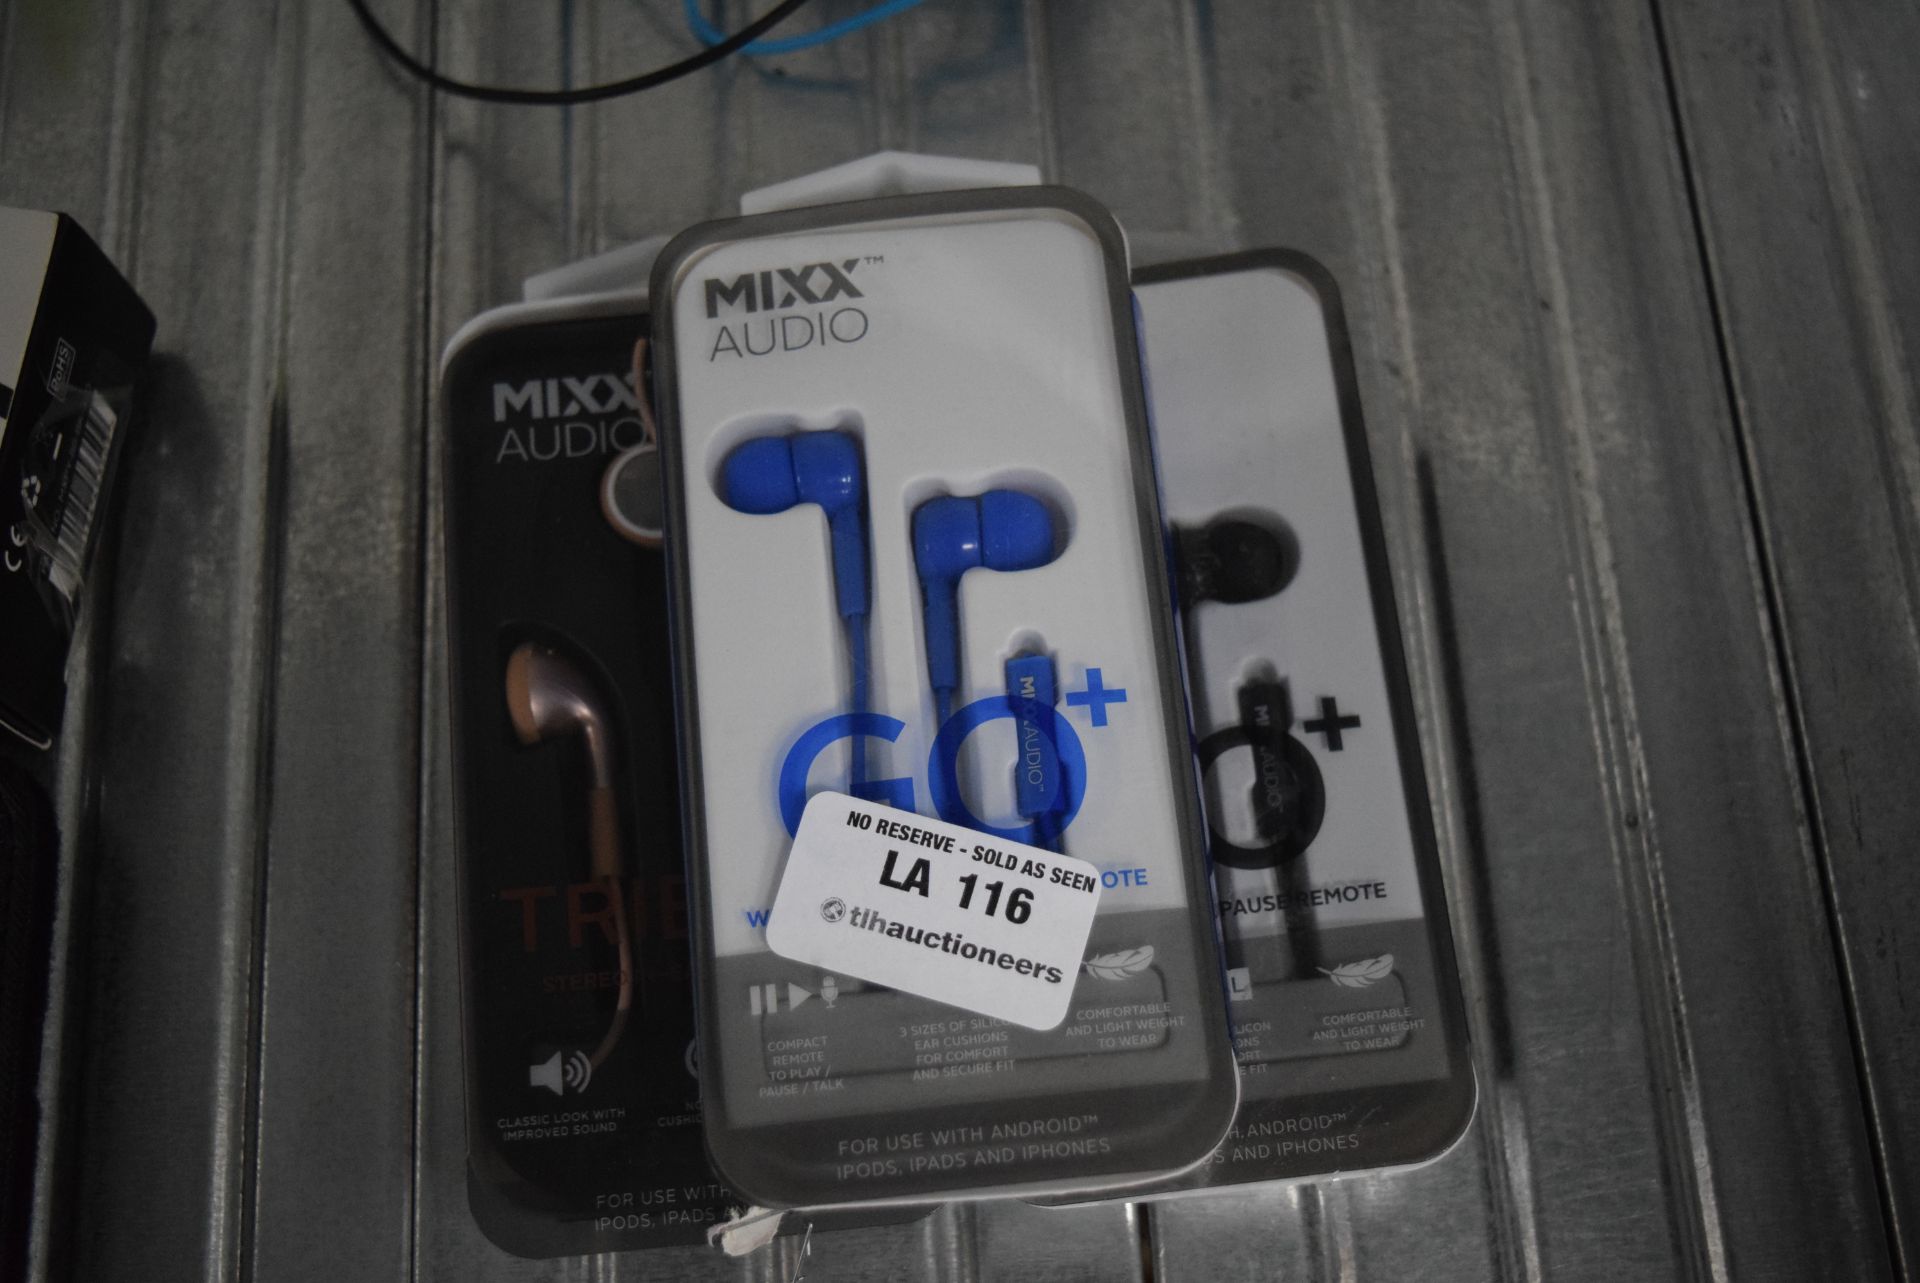 3 X ITEMS TO MIXX AUDIO GO PLUS EARPHONES AND OTHERS